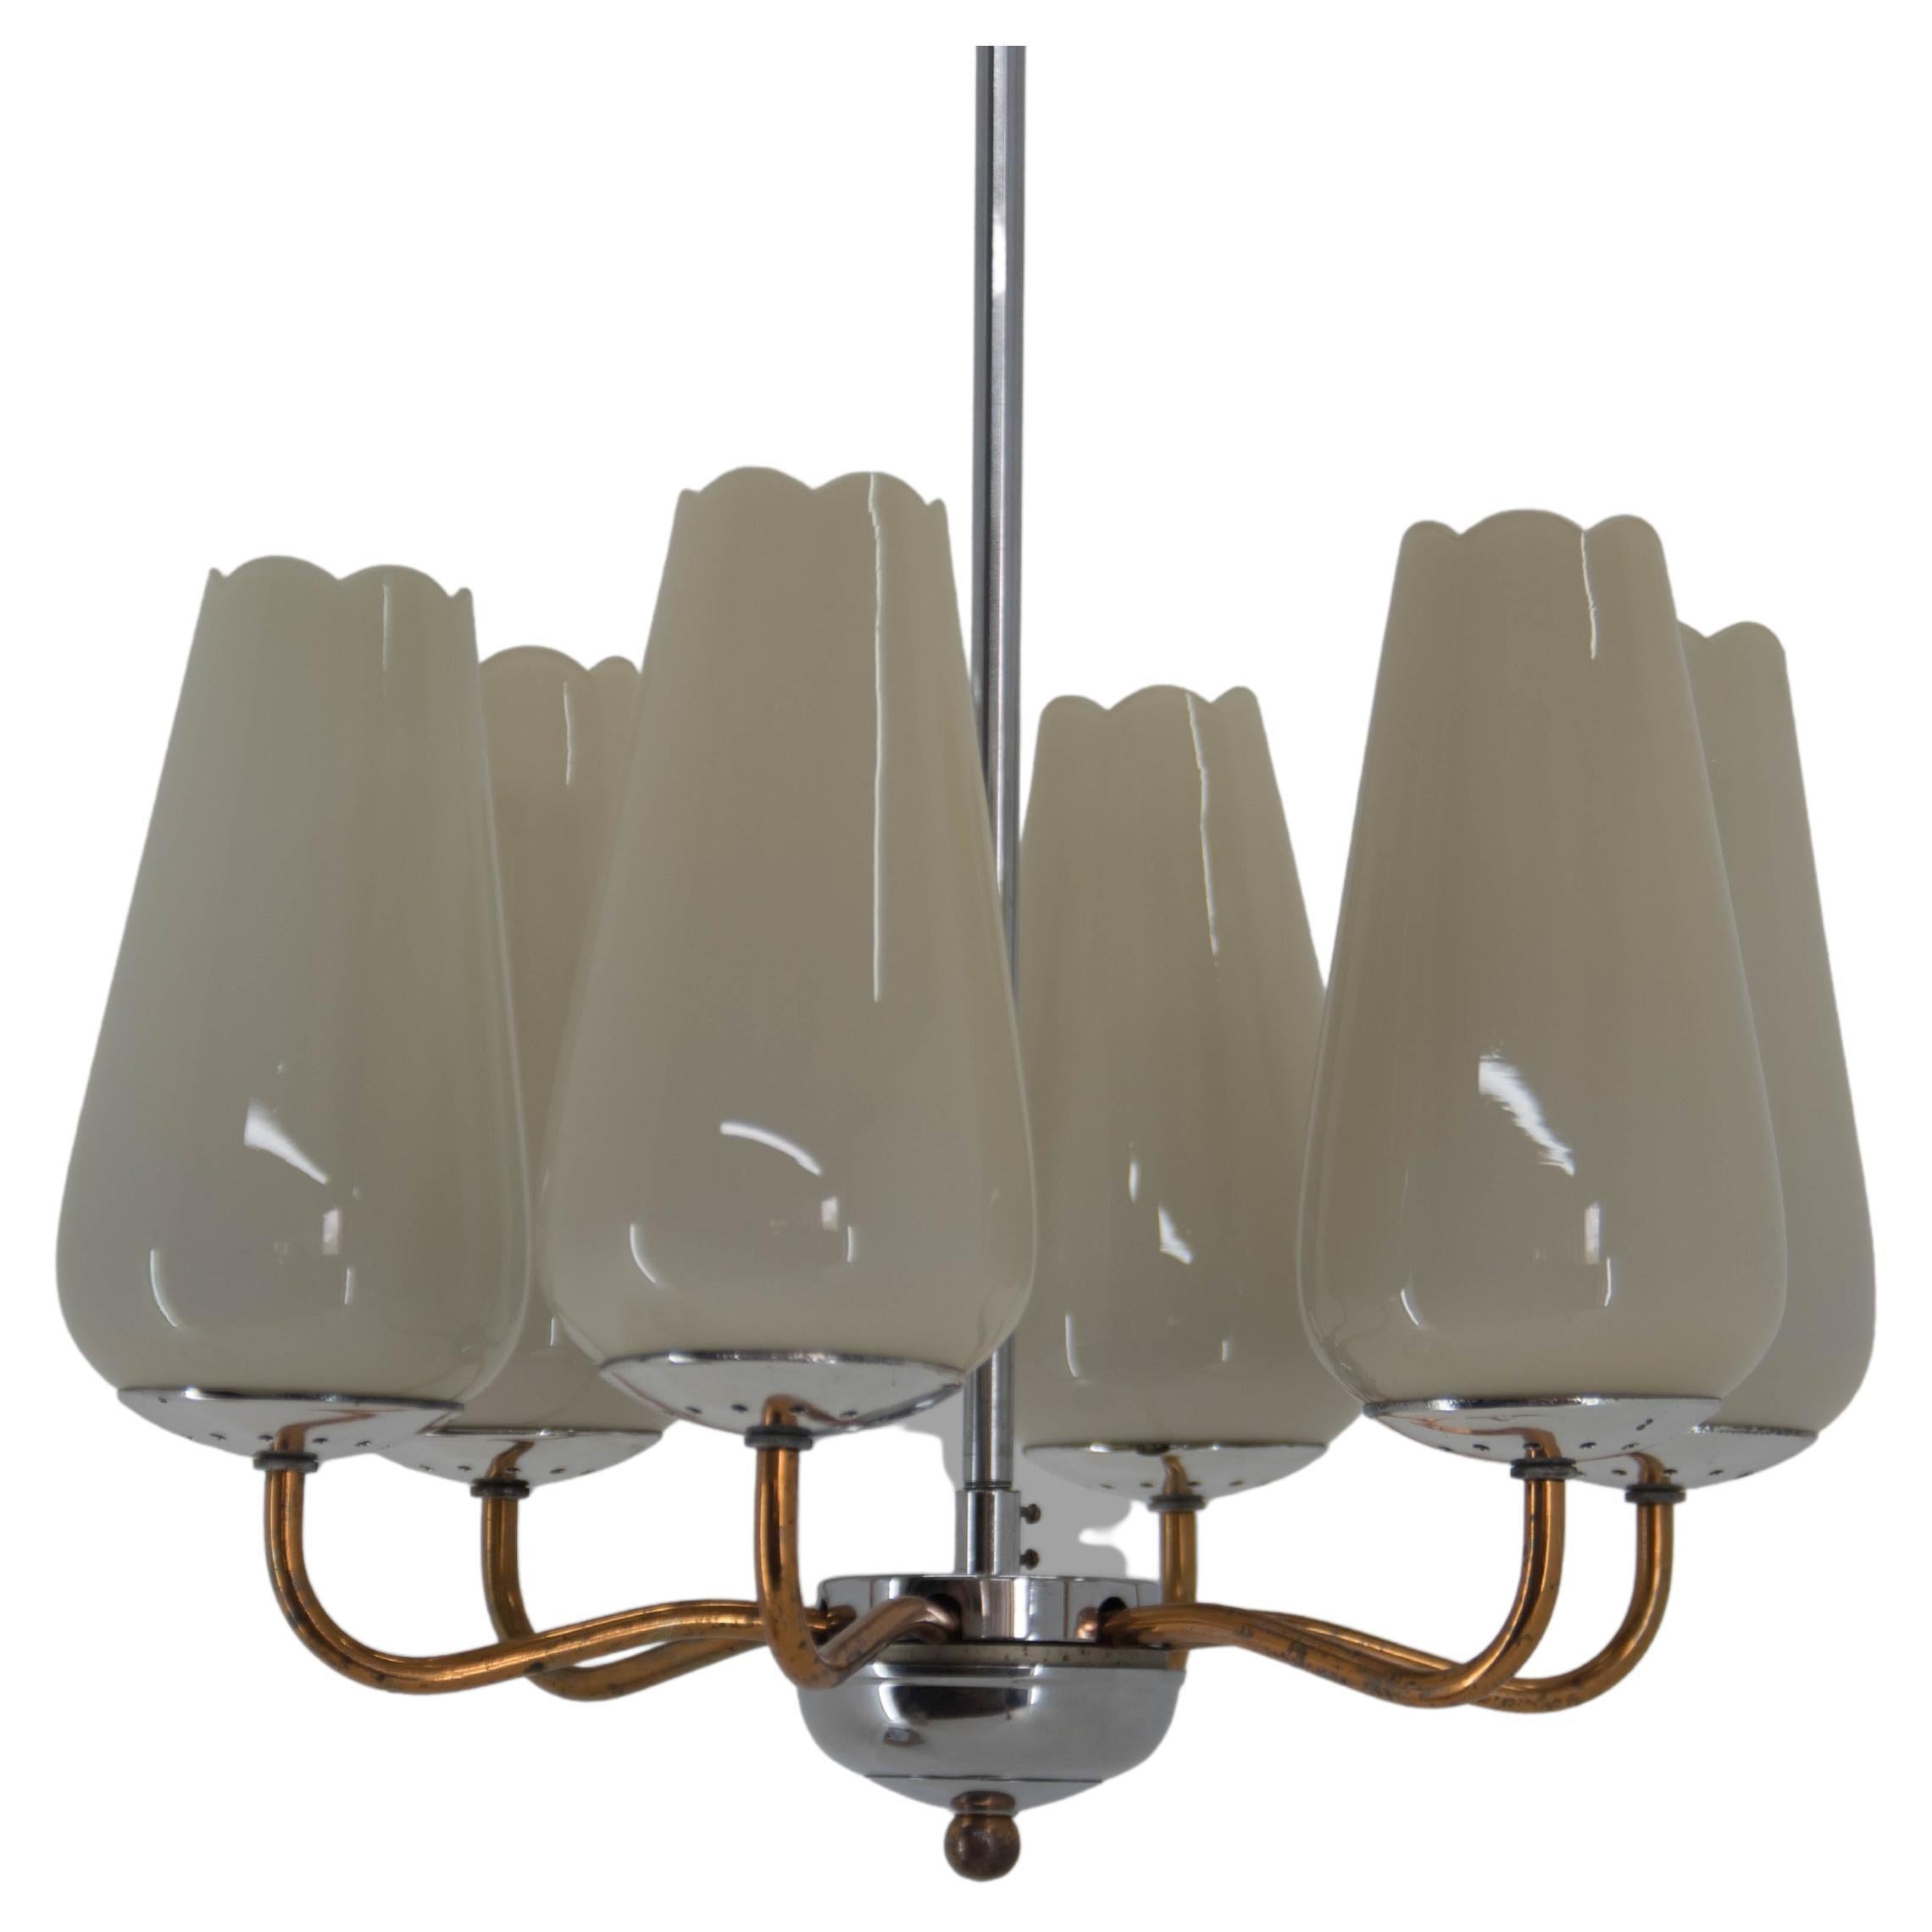 6-flamming chandelier made of copper and chrome plated metal and glass shades.
Glass shades in perfect condition.
Glass ceiling canopy with one small chip.
Copper plating with age patina.
Rewired: 6x40W, E25-E27 bulbs
US wiring compatible.